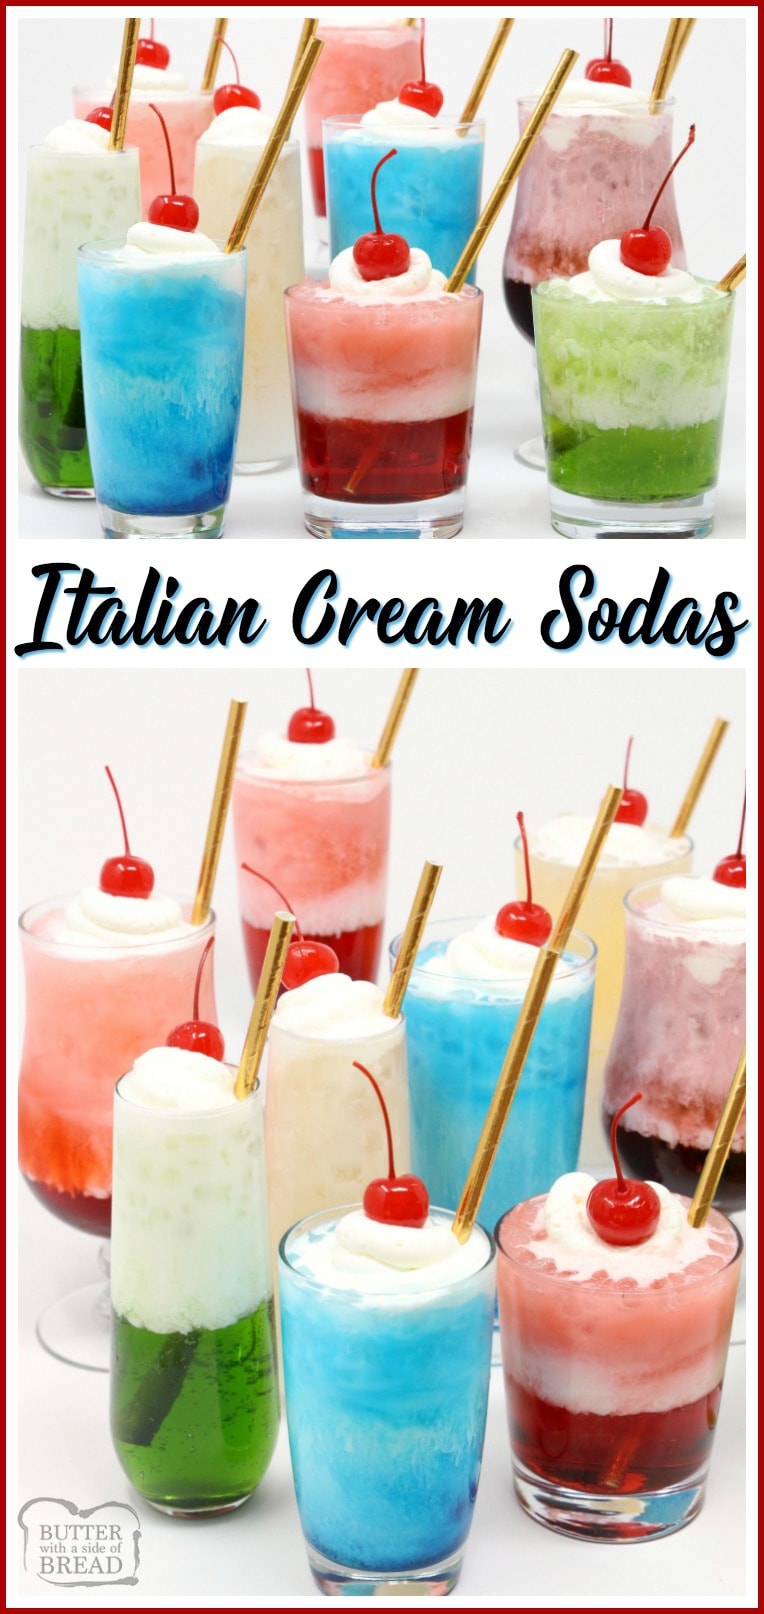 Italian Cream Soda Recipe made with sweet syrups, cream and club soda. It's a delicious & festive beverage for any special occasion! Easy #holiday #drink recipe from Butter With A Side of Bread